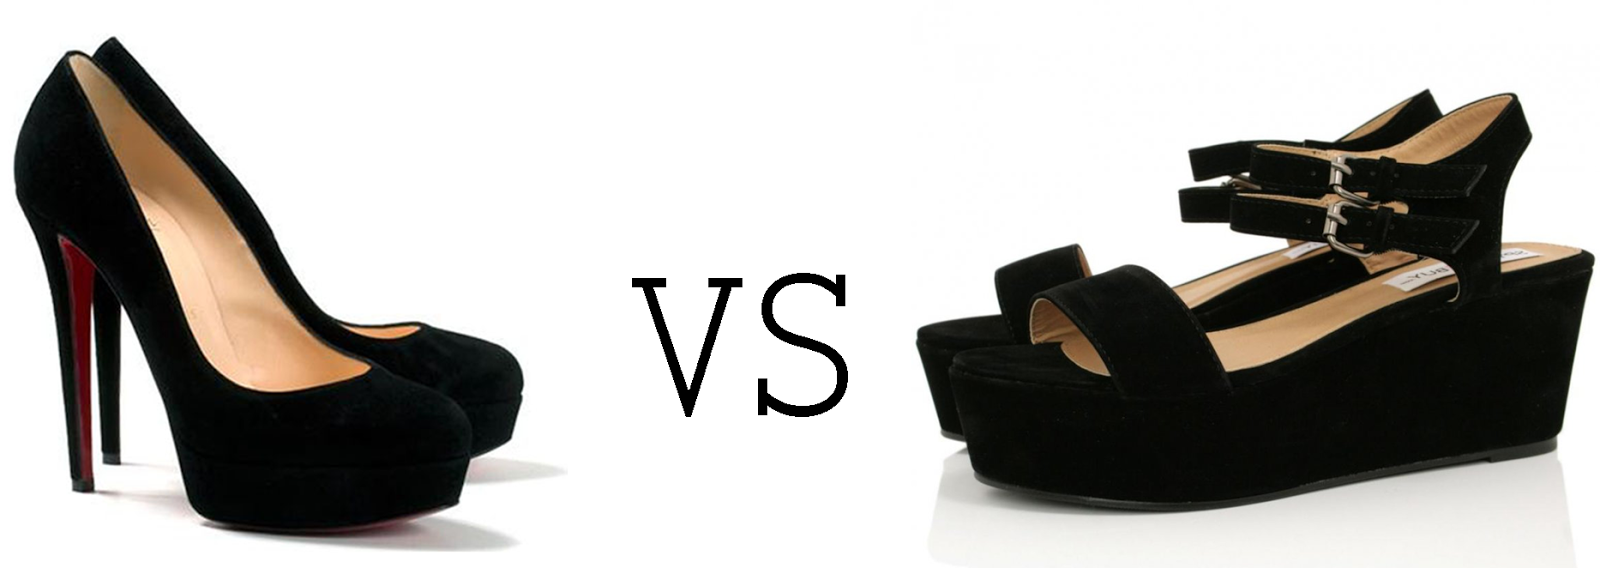 Rund Opgive kaptajn The Craziest Paradigm // fashion, beauty + lifestyle: Pump Shoes and  Platforms: What's the Difference?